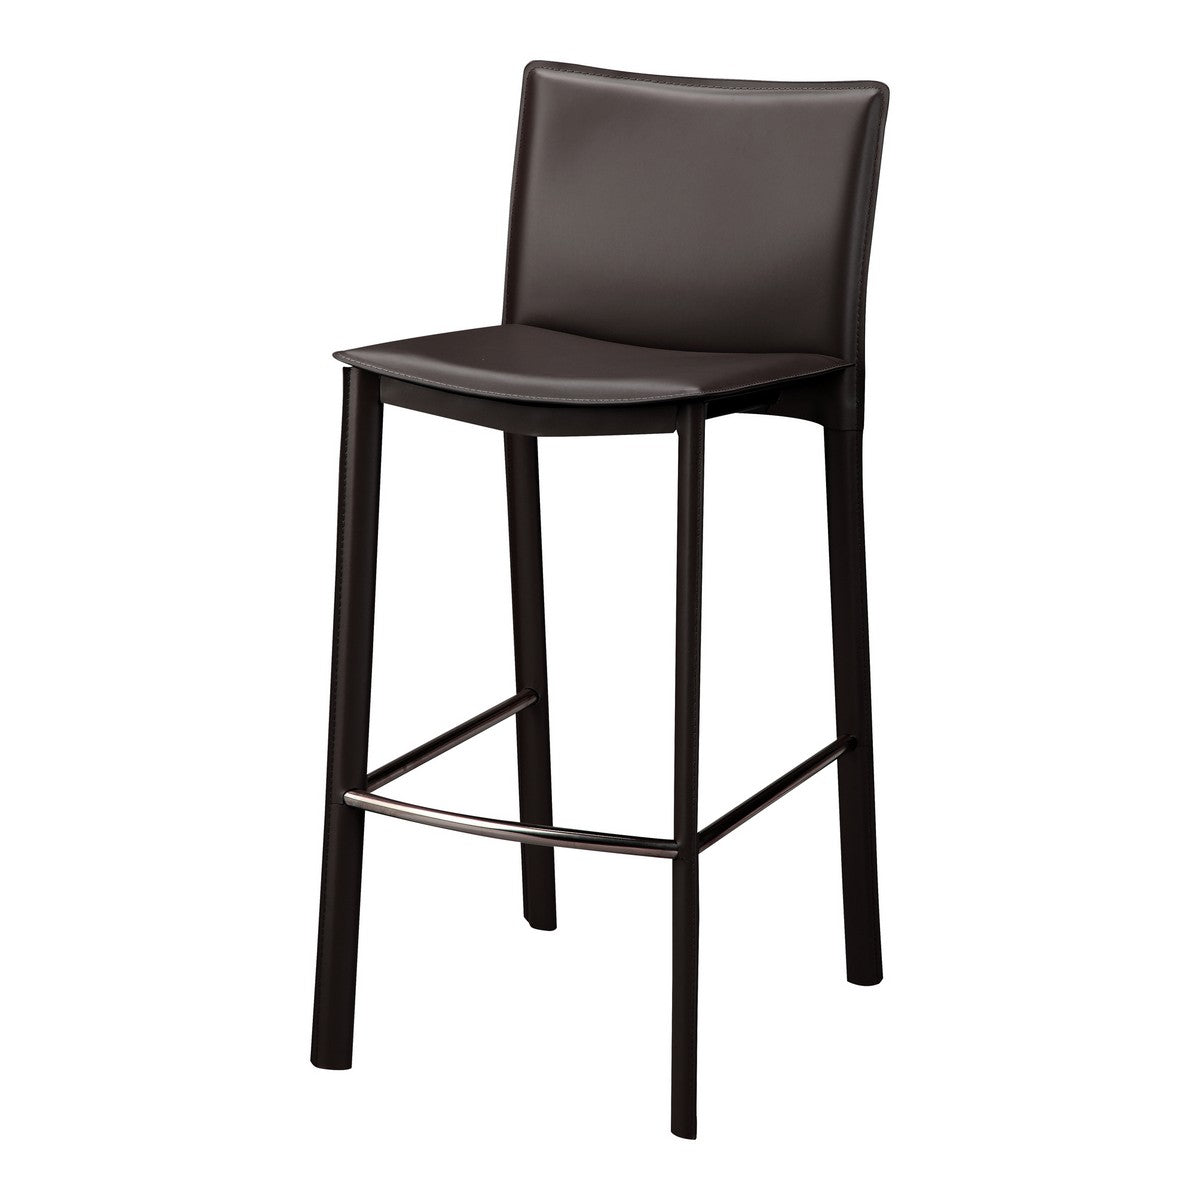 Moe's Home Collection Panca Counter Stool 26" Dark Brown - EH-1034-20